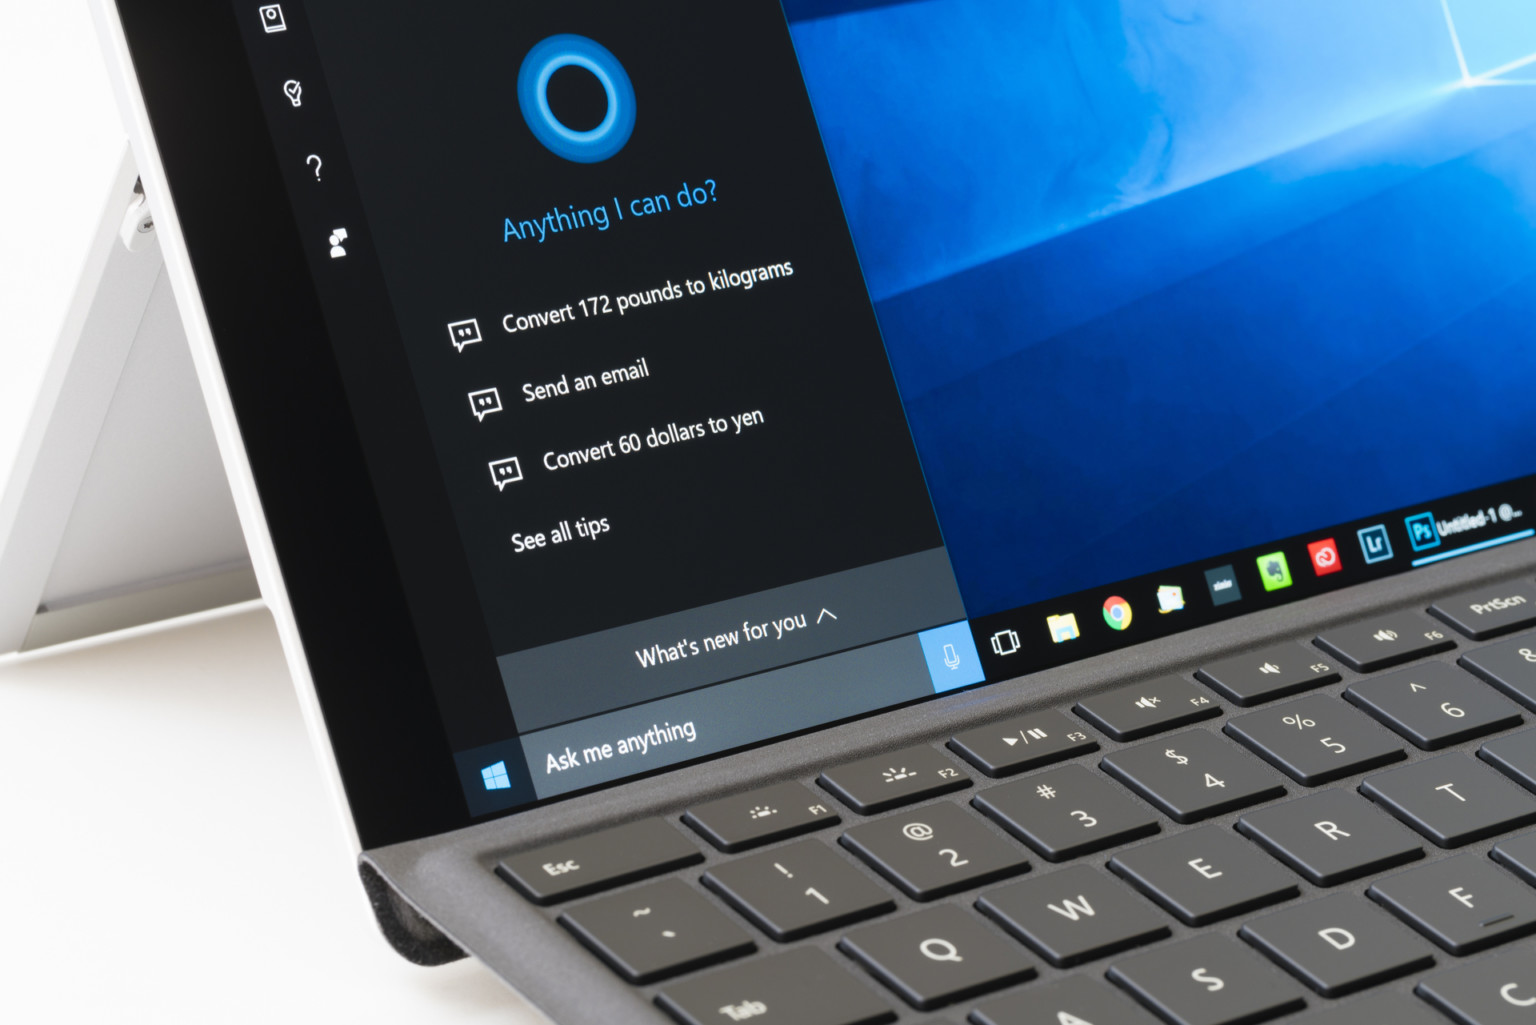 Windows 10 Operation System Cortana Assistant Quick Guide Tips And Features 6443